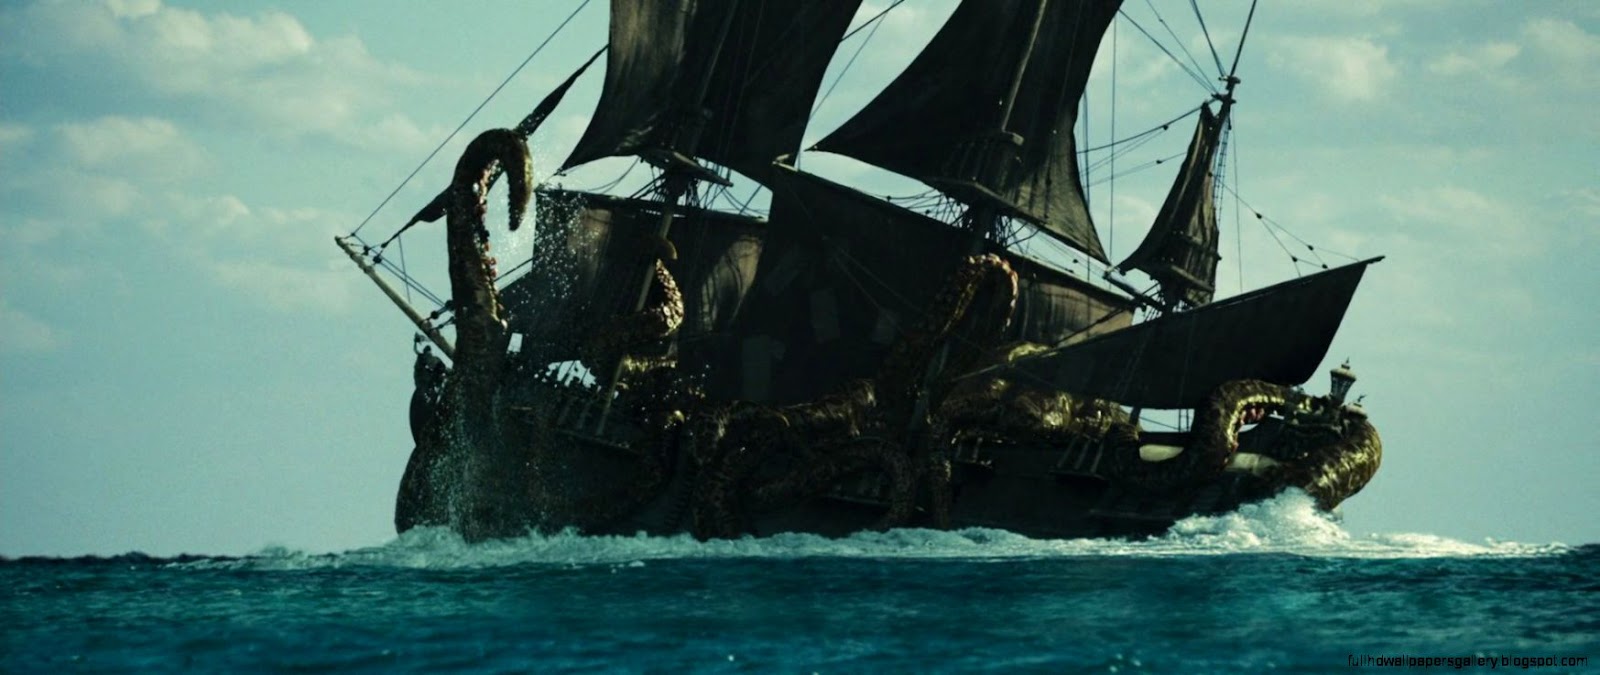 Pirates Caribbean Pictures Black Pearl Ship